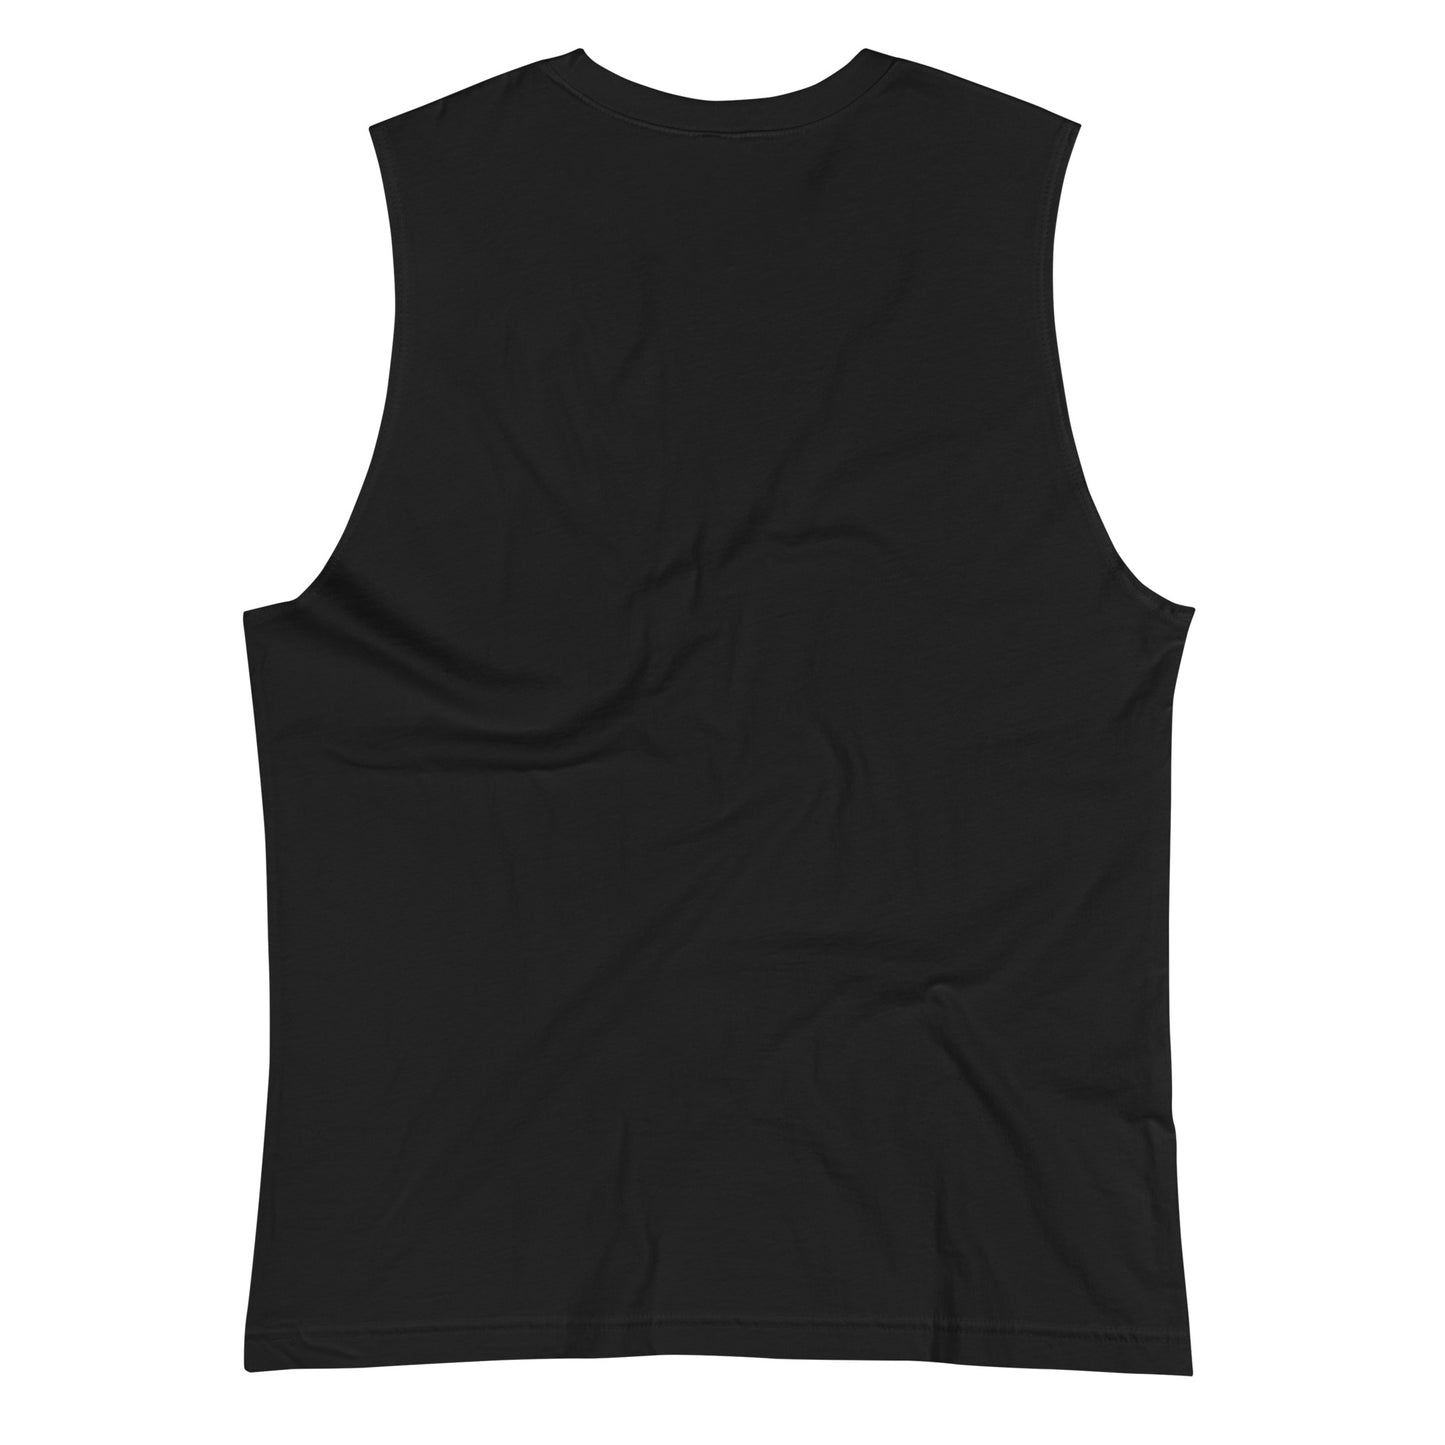 MAKE YOUR MARK Muscle Shirt